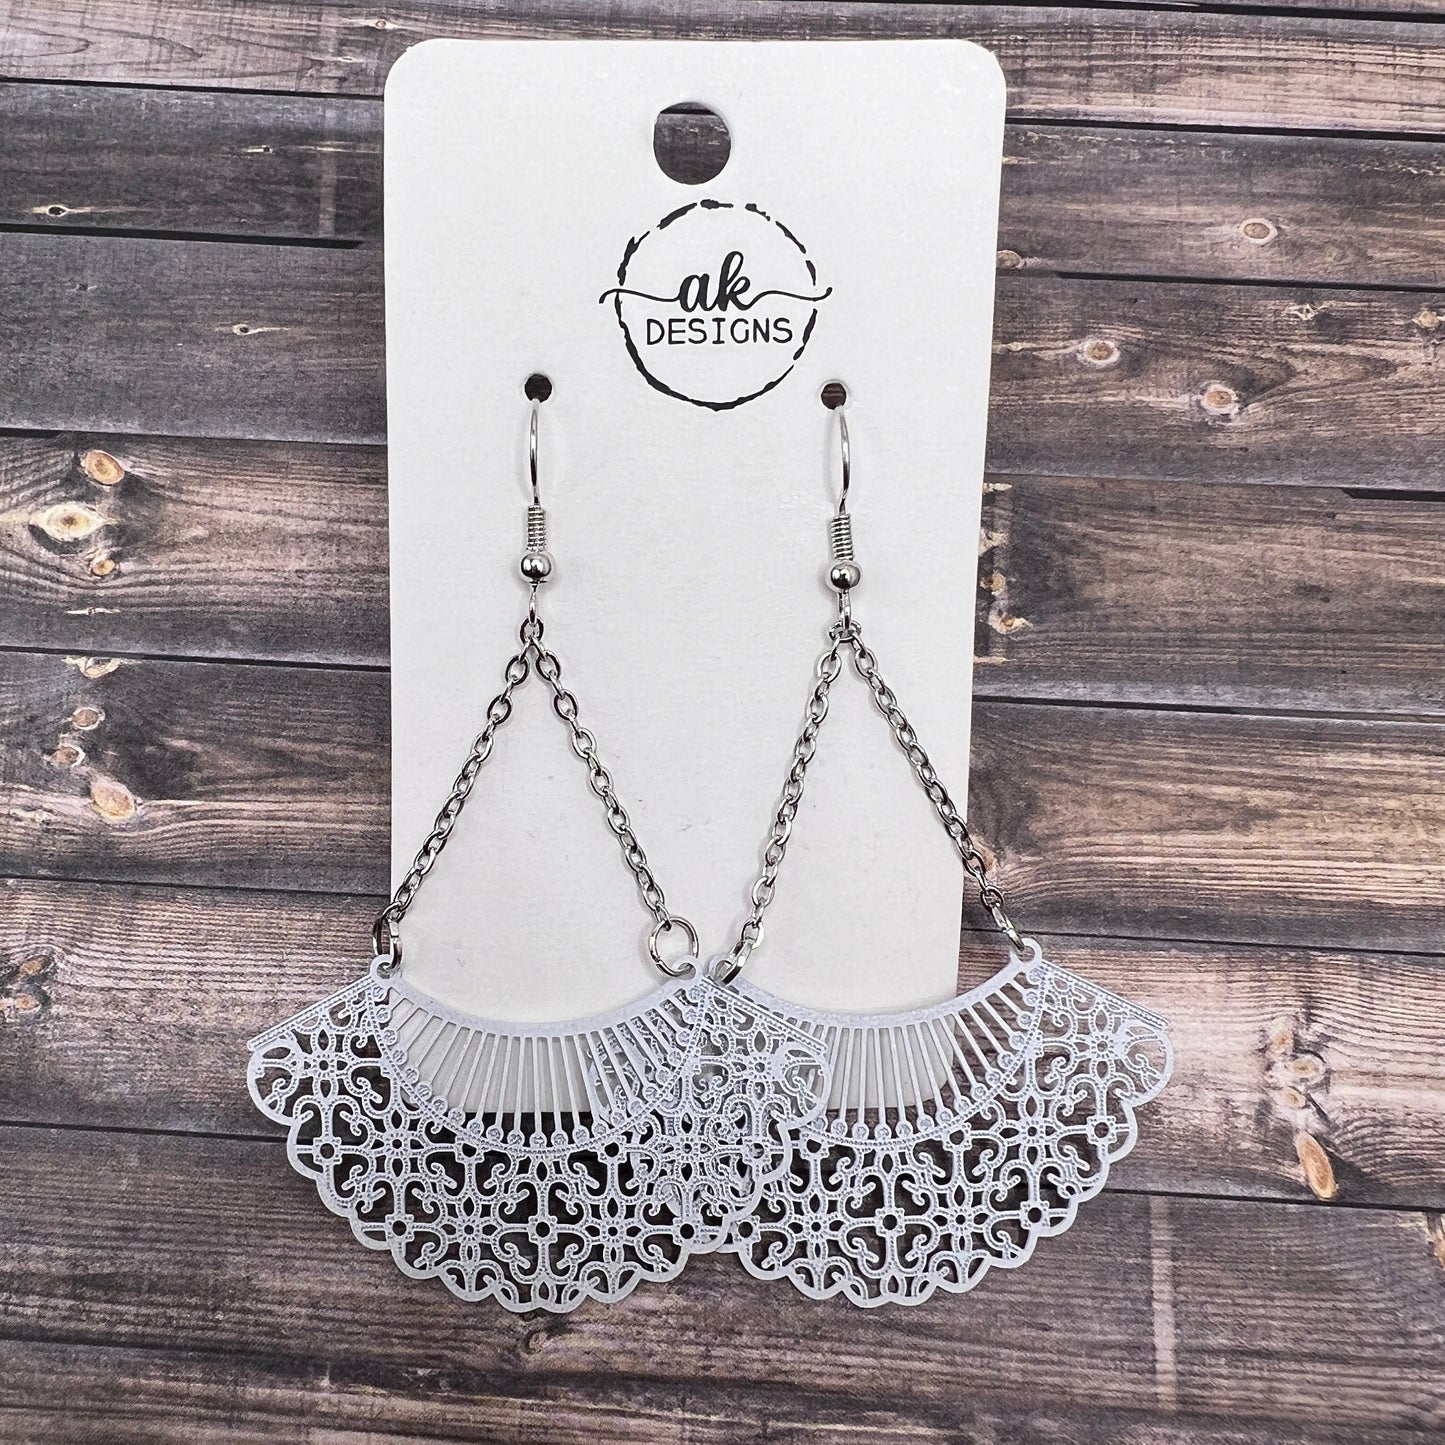 Dissent Lace Collar RBG Inspired Justice Filigree  Earrings